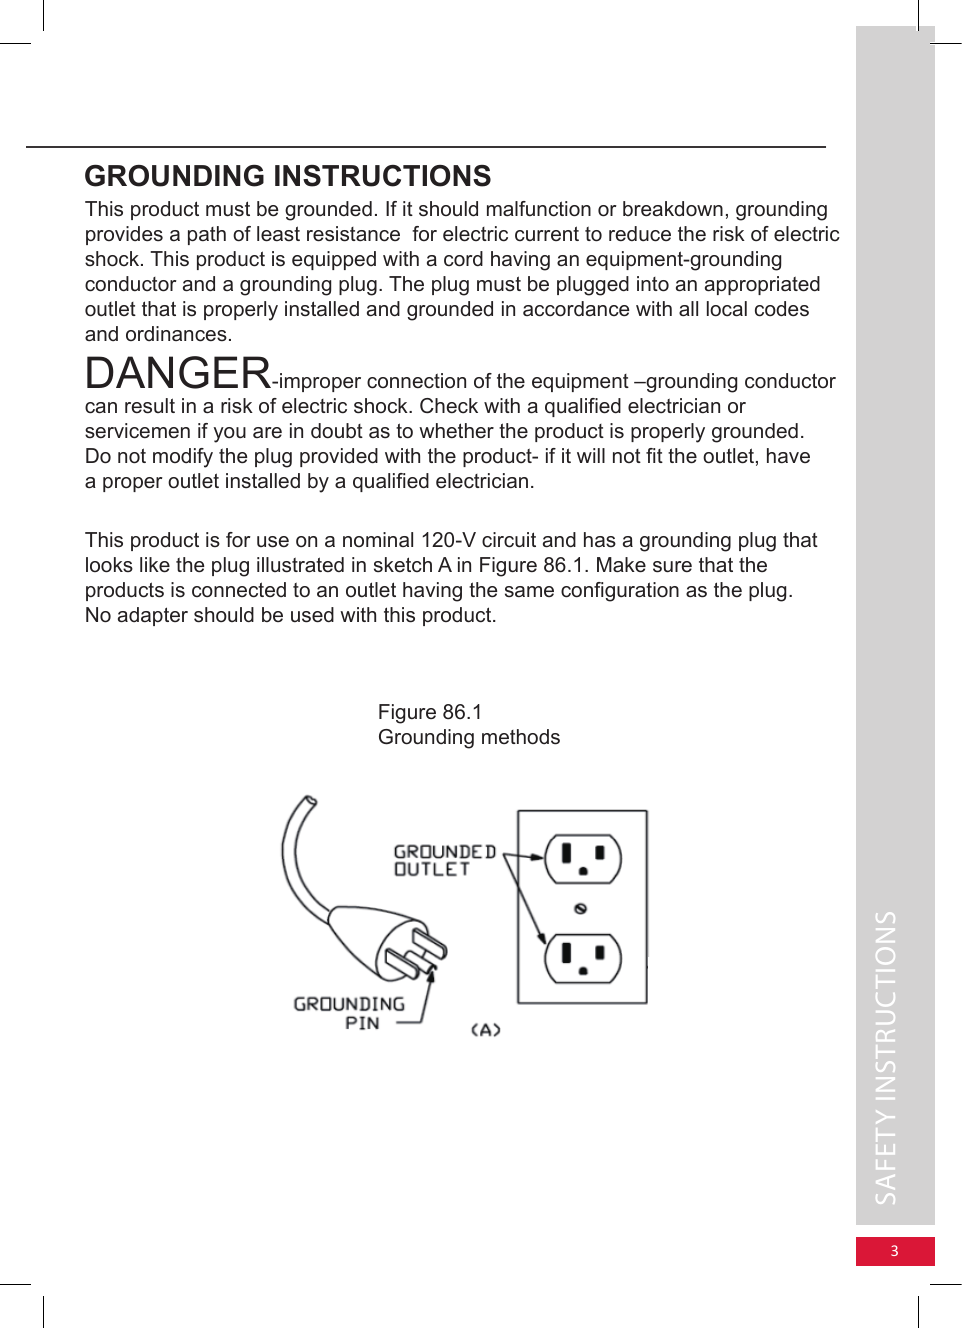 This product must be grounded. If it should malfunction or breakdown, grounding provides a path of least resistance  for electric current to reduce the risk of electric shock. This product is equipped with a cord having an equipment-grounding conductor and a grounding plug. The plug must be plugged into an appropriated outlet that is properly installed and grounded in accordance with all local codes and ordinances.DANGER-improper connection of the equipment –grounding conductor can result in a risk of electric shock. Check with a qualified electrician or servicemen if you are in doubt as to whether the product is properly grounded. Do not modify the plug provided with the product- if it will not fit the outlet, have a proper outlet installed by a qualified electrician.This product is for use on a nominal 120-V circuit and has a grounding plug that looks like the plug illustrated in sketch A in Figure 86.1. Make sure that the products is connected to an outlet having the same configuration as the plug. No adapter should be used with this product.SAFETY INSTRUCTIONS  GROUNDING INSTRUCTIONSFigure 86.1Grounding methods3